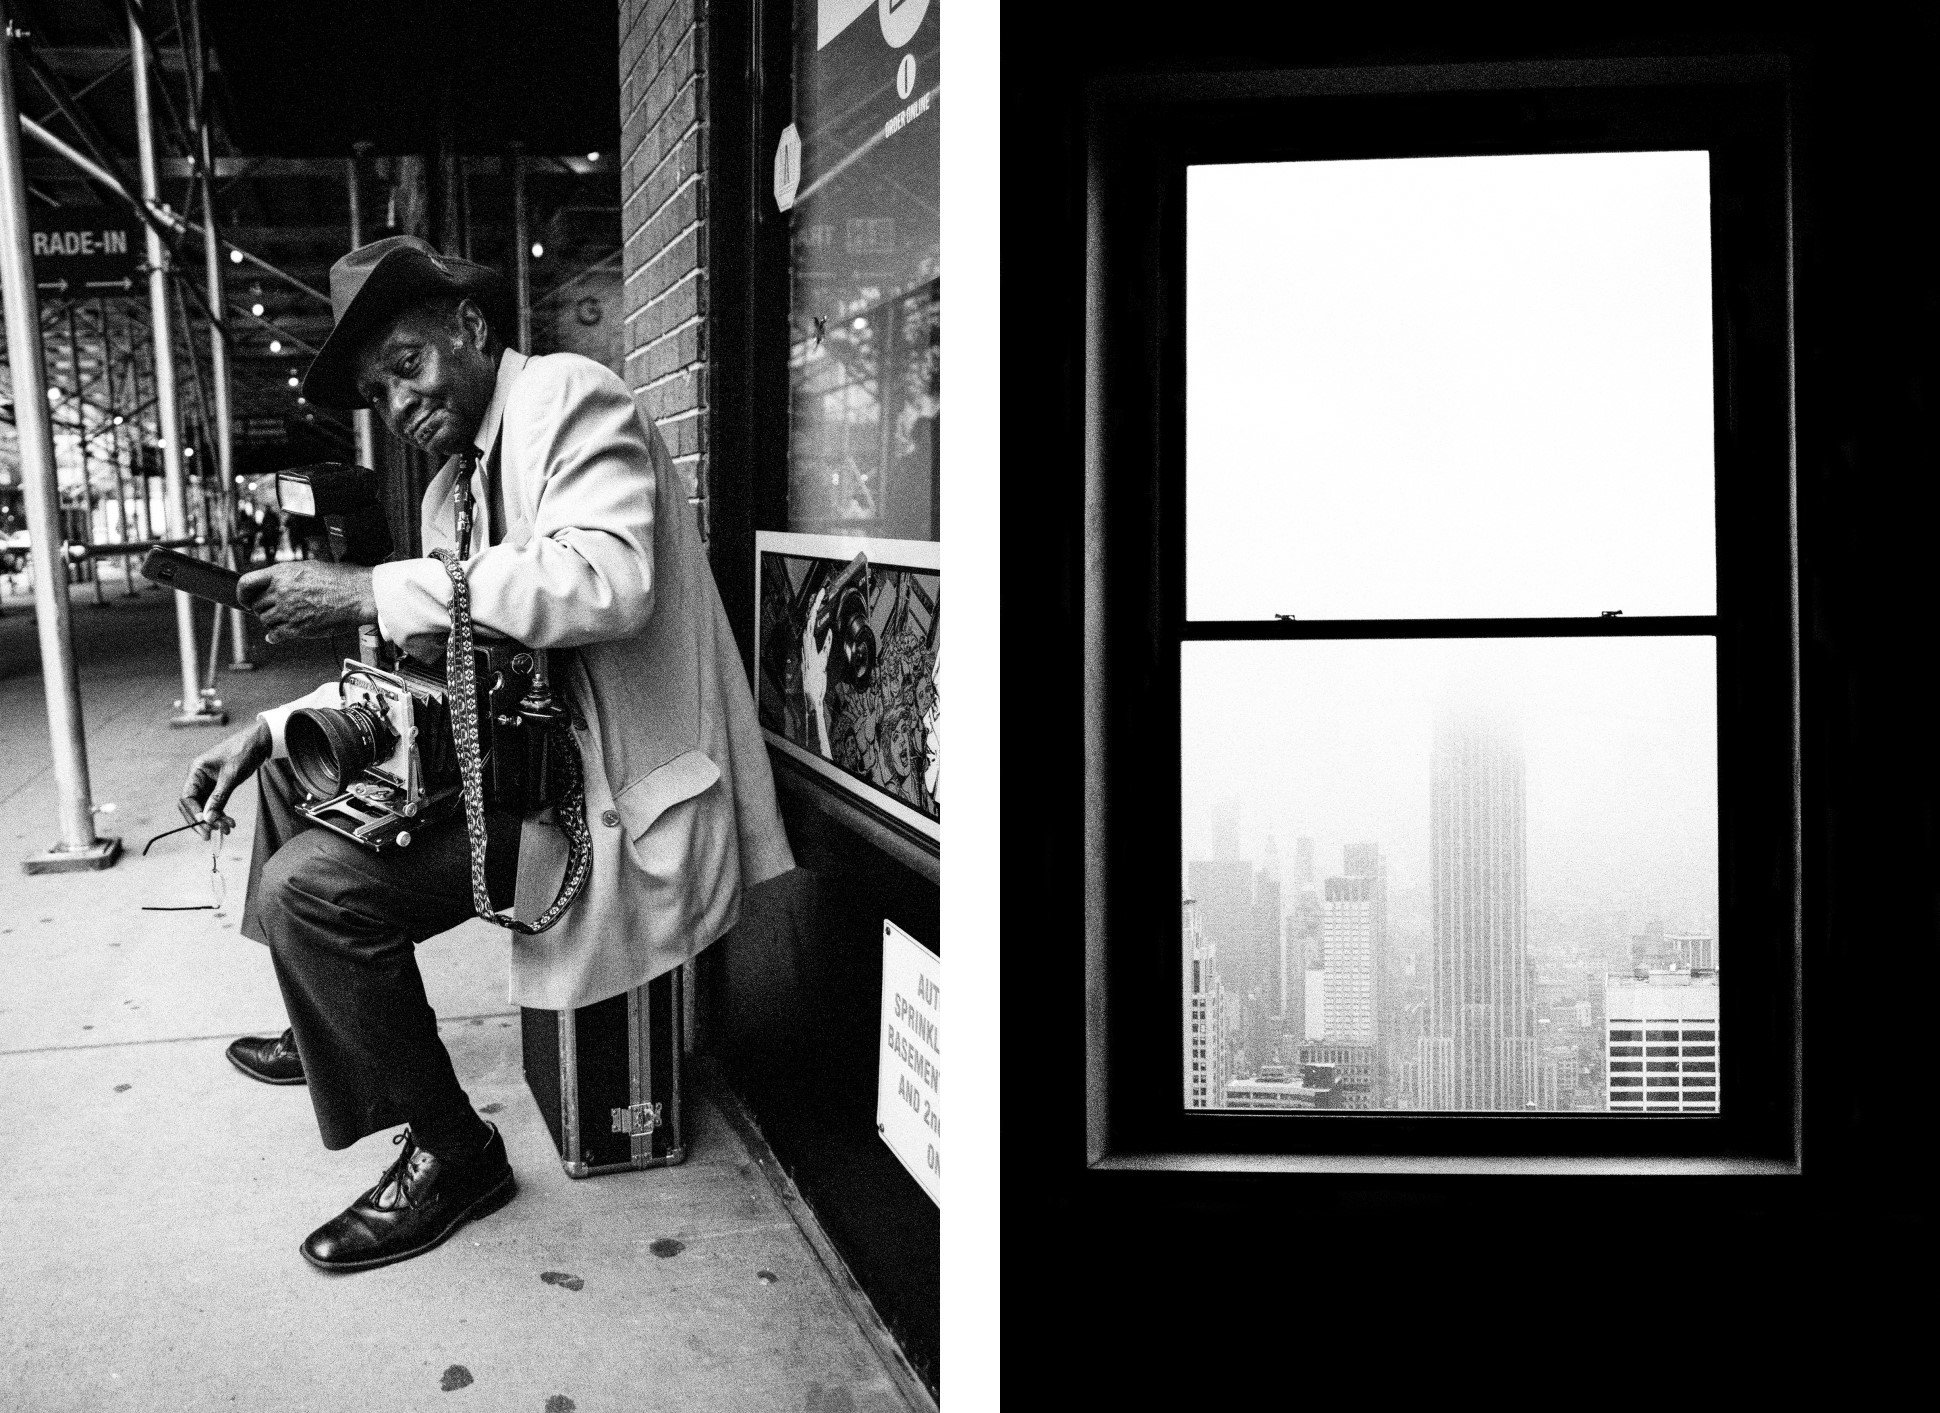 Left, man sitting on case in street and holding old camera. Right, cloudy cityscape as seen through an apartment window